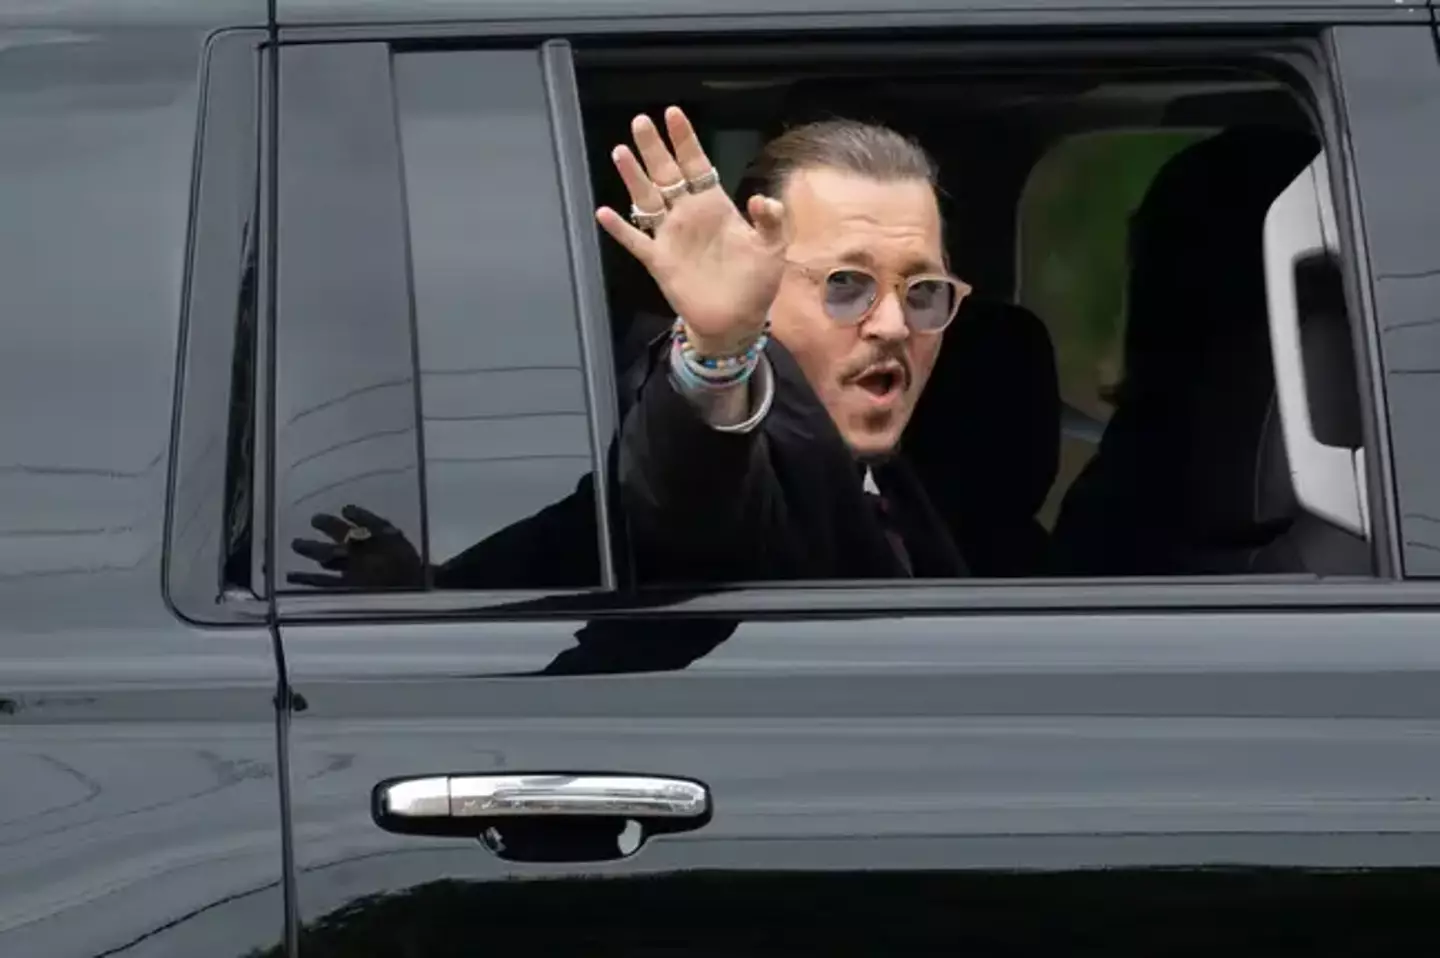 Johnny Depp waving to fans outside of the courthouse.